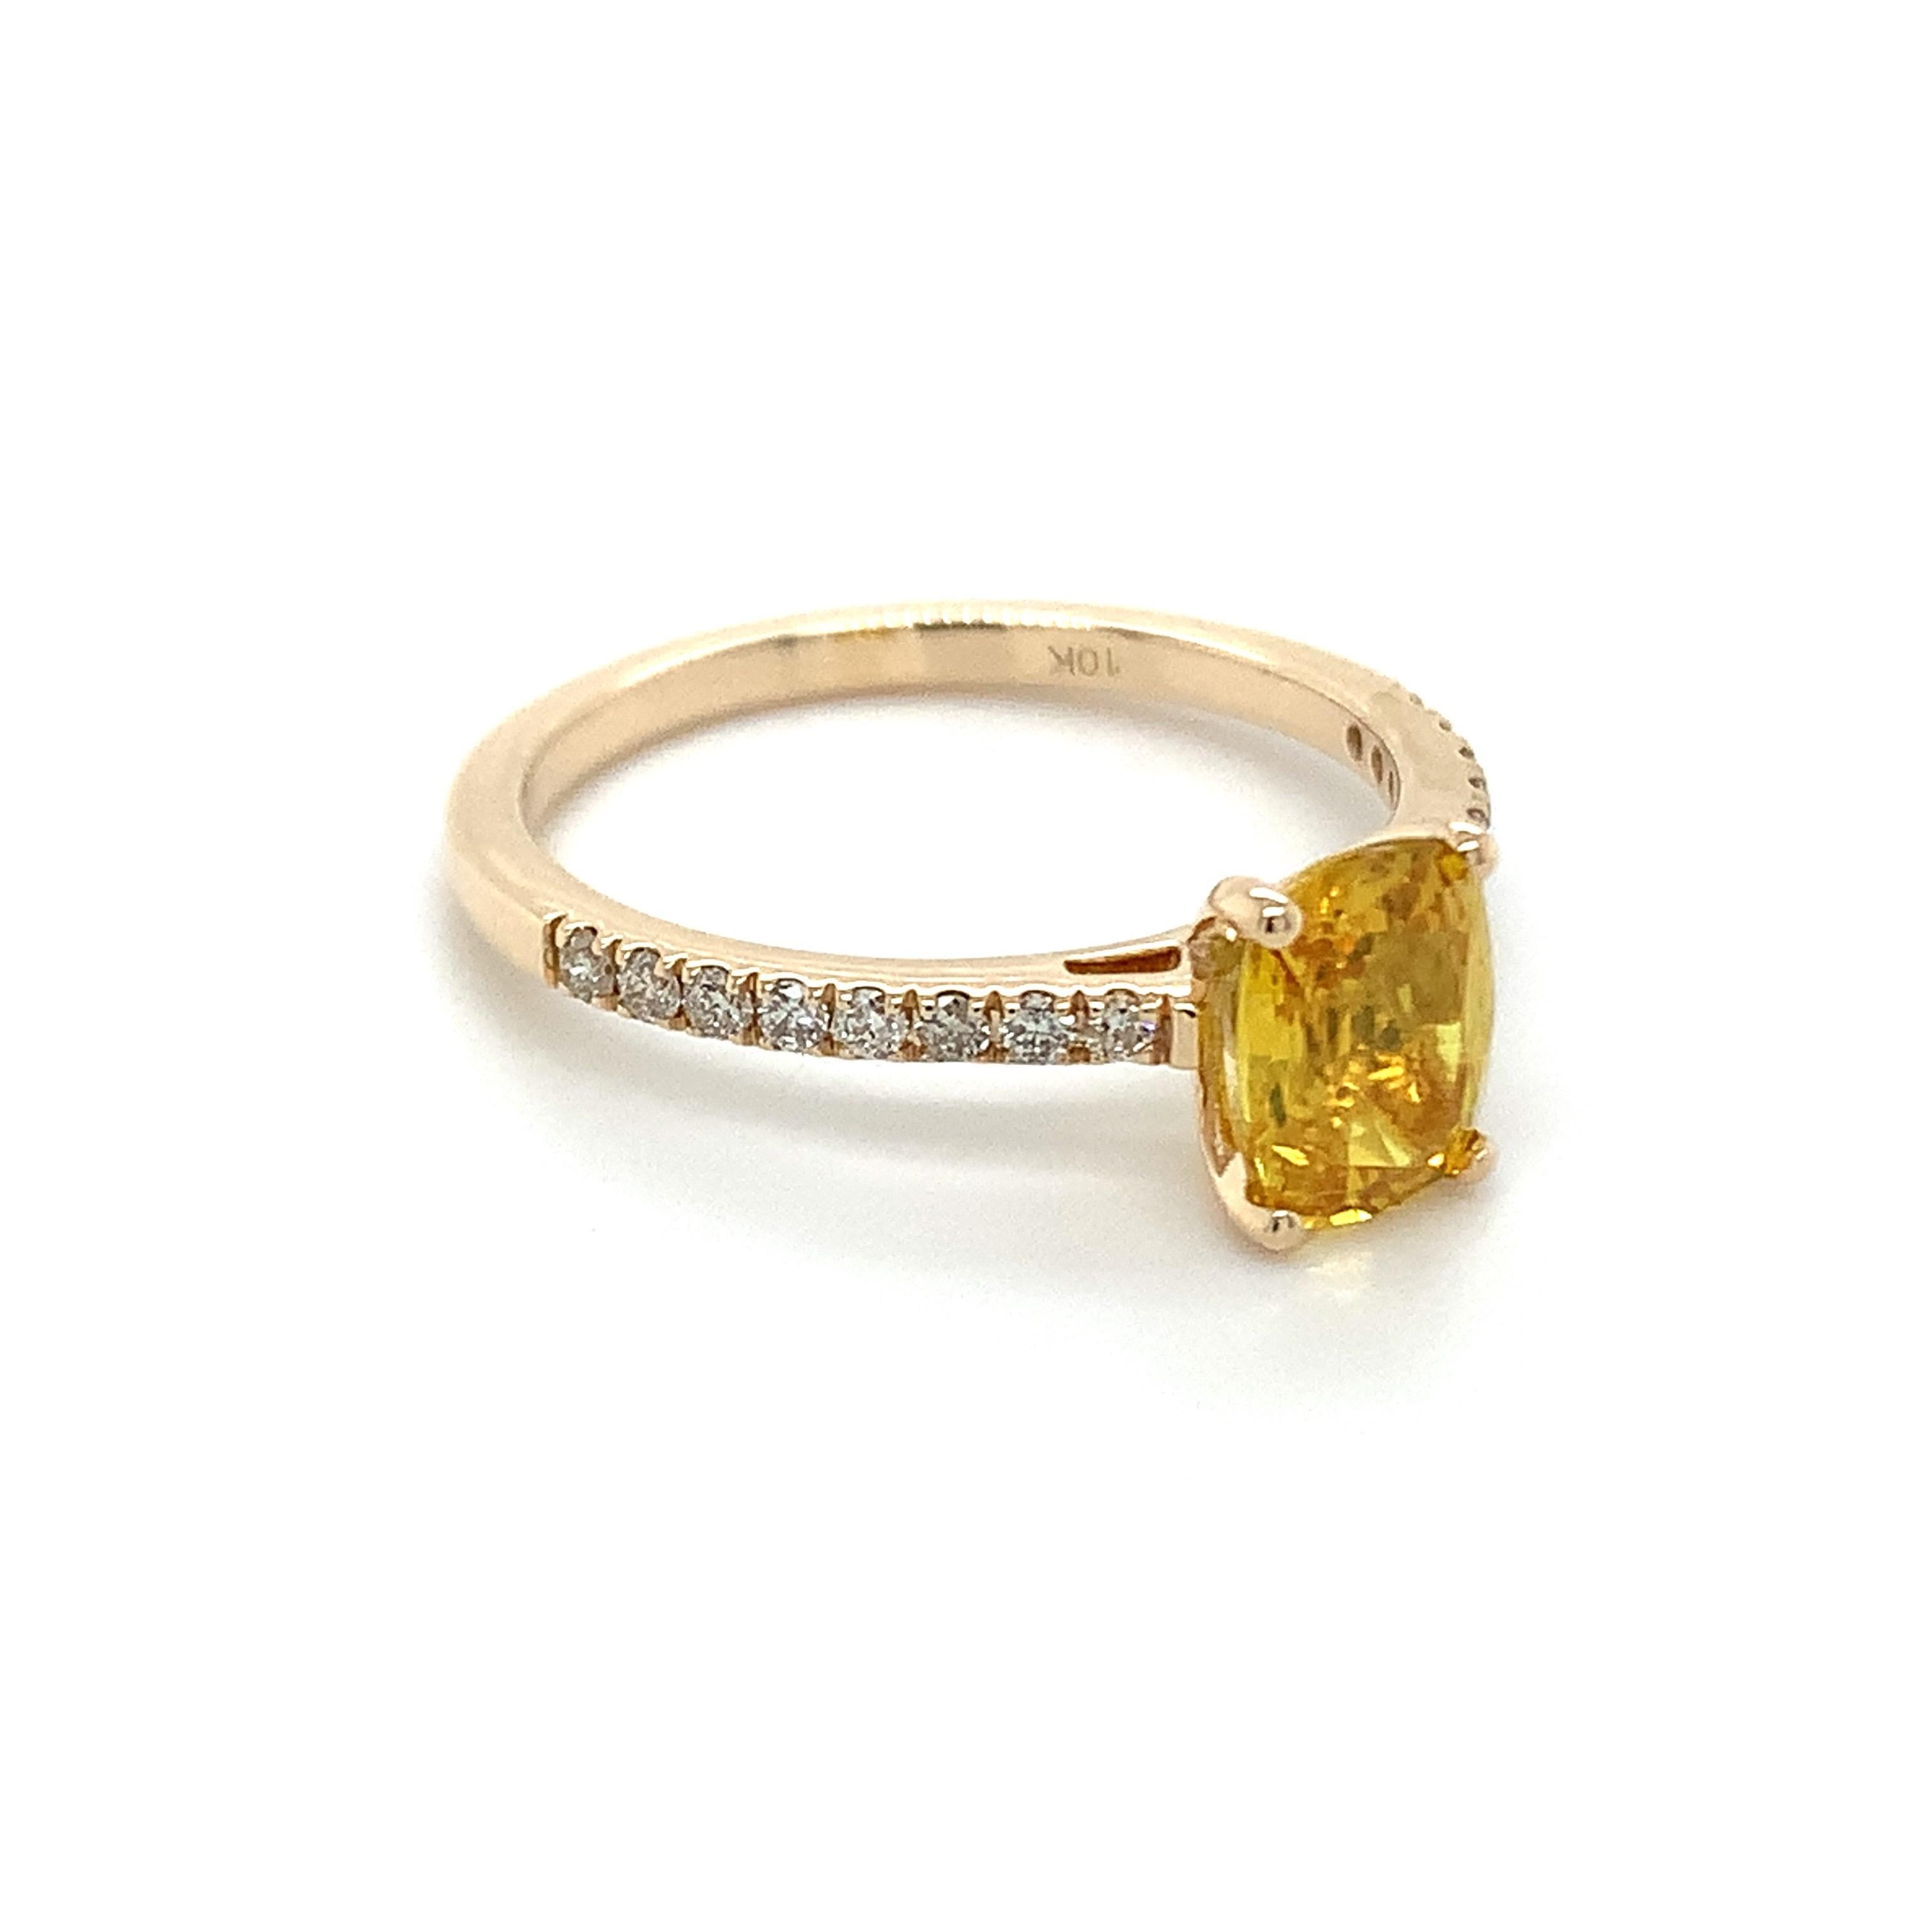 Cushion cut Yellow Sapphire gemstone beautifully crafted in a 10K yellow gold ring with natural diamonds.

A highly precious September birthstone with a delighting yellow color. They are believed to bring good luck & fortune in life. Explore a vast